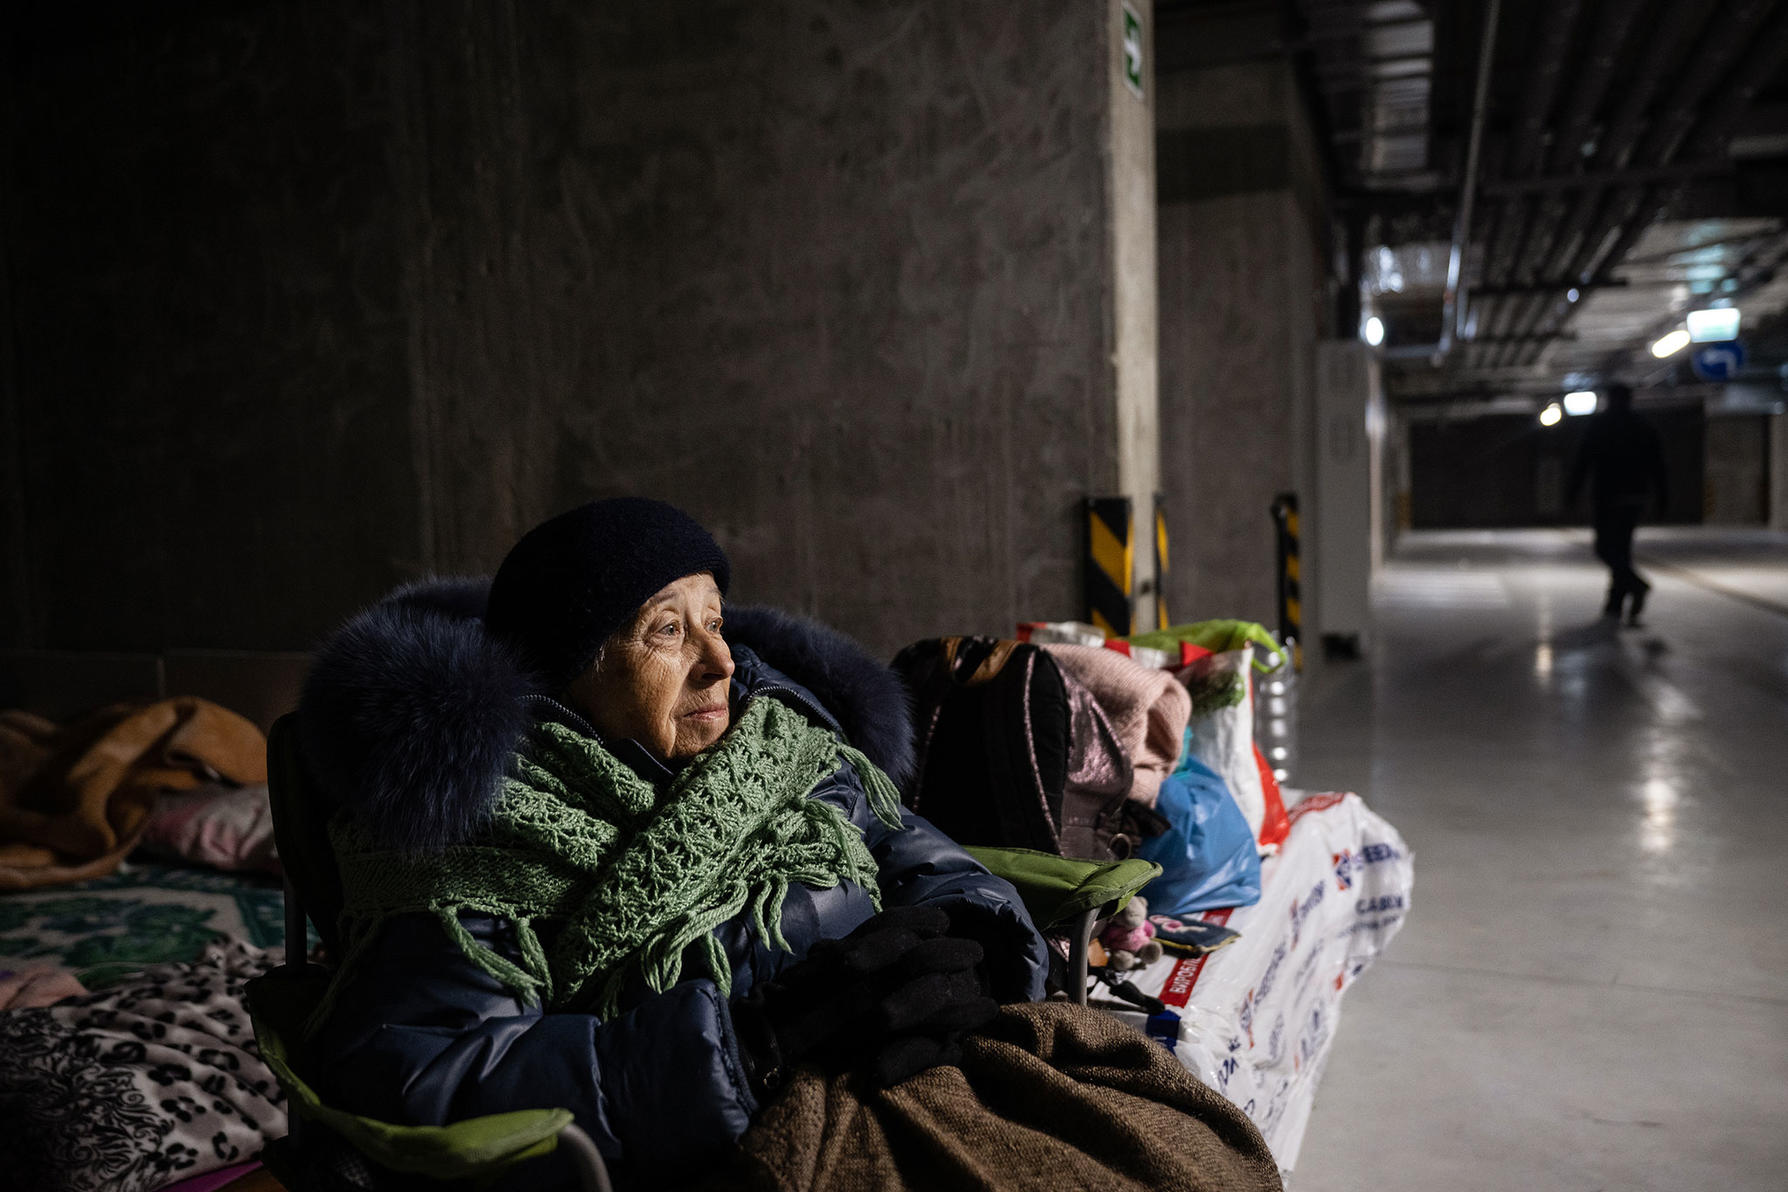 Svetlana Akimova shelters in a parking garage after heavy fighting took place outside her apartment building in Kyiv, Ukraine, on Saturday, Feb. 26, 2022. (Lynsey Addario/The New York Times)